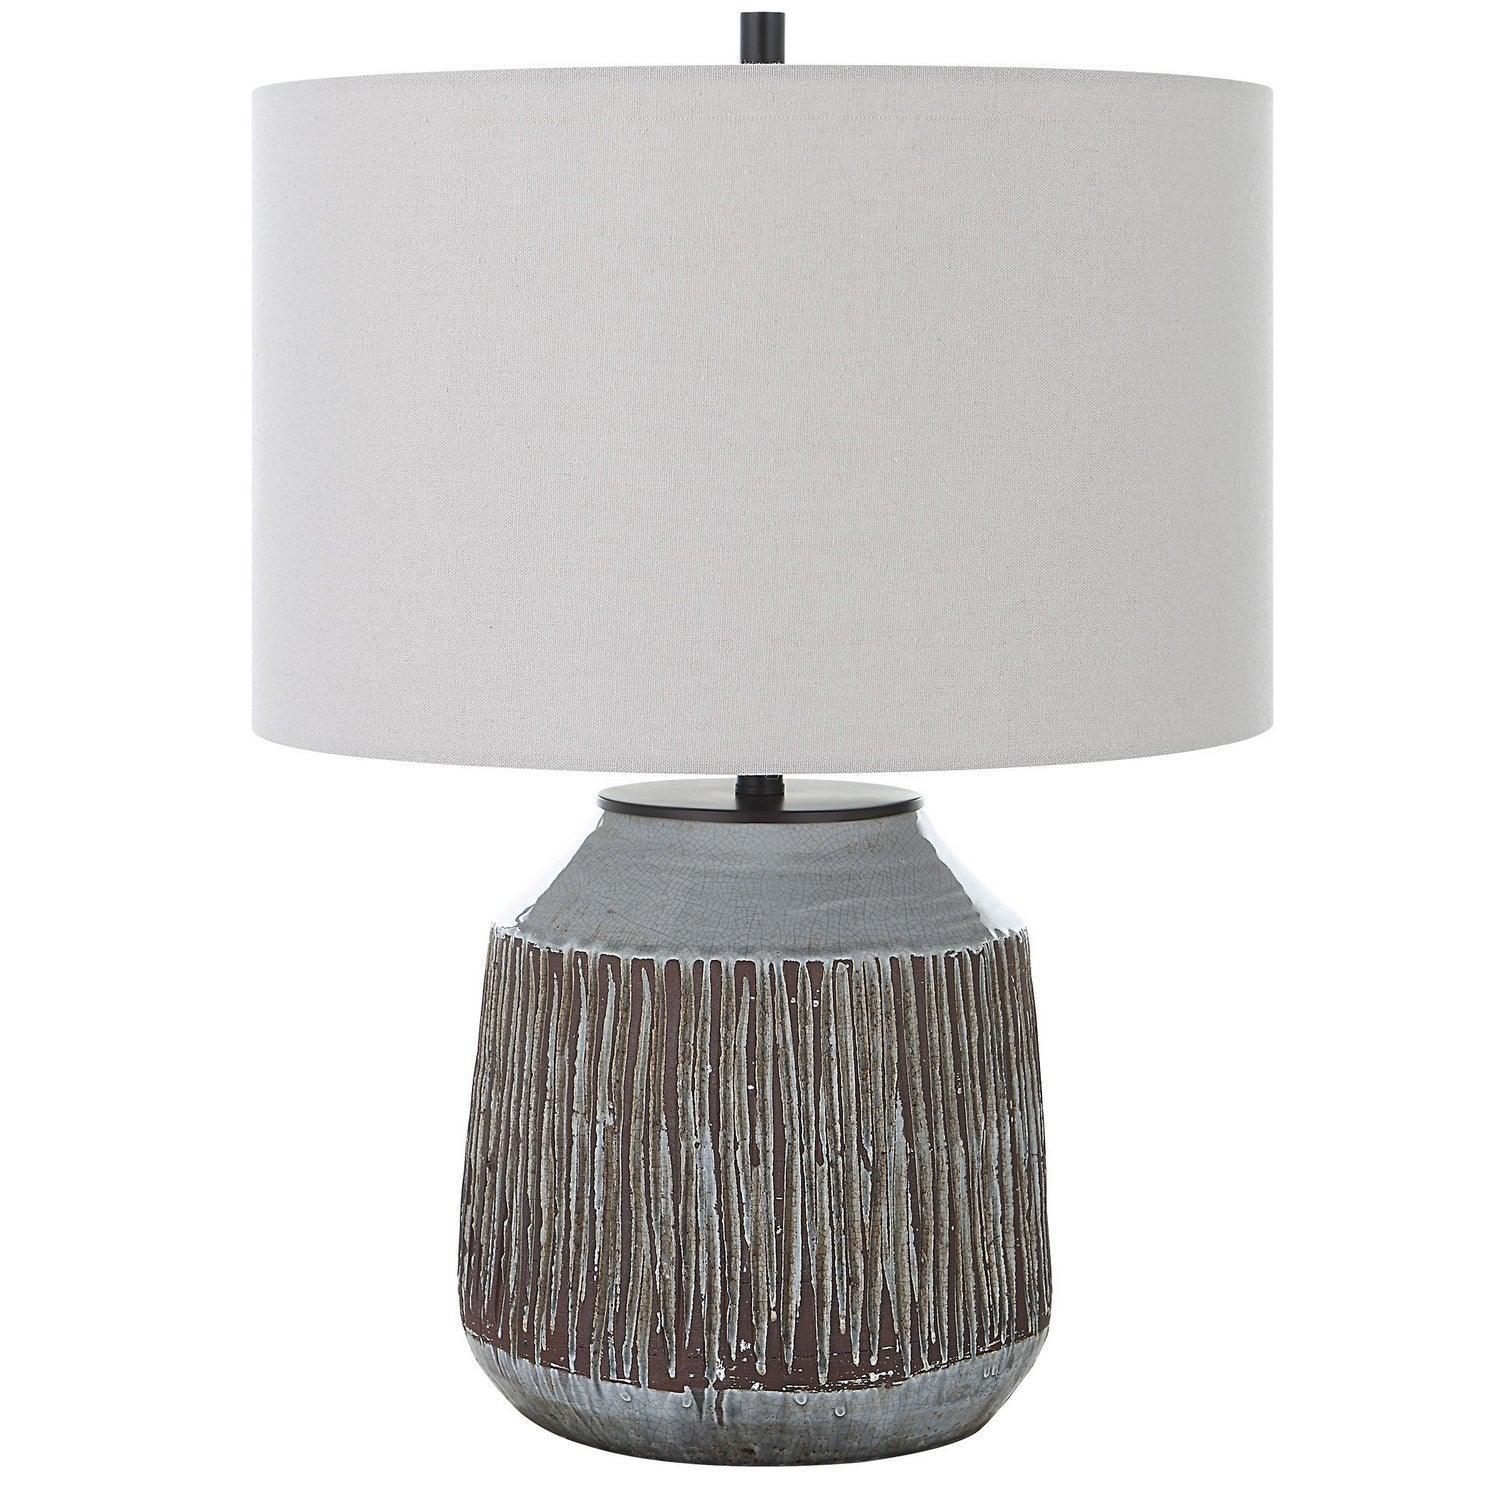 The Uttermost - Neolithic Table Lamp - 30062-1 | Montreal Lighting & Hardware